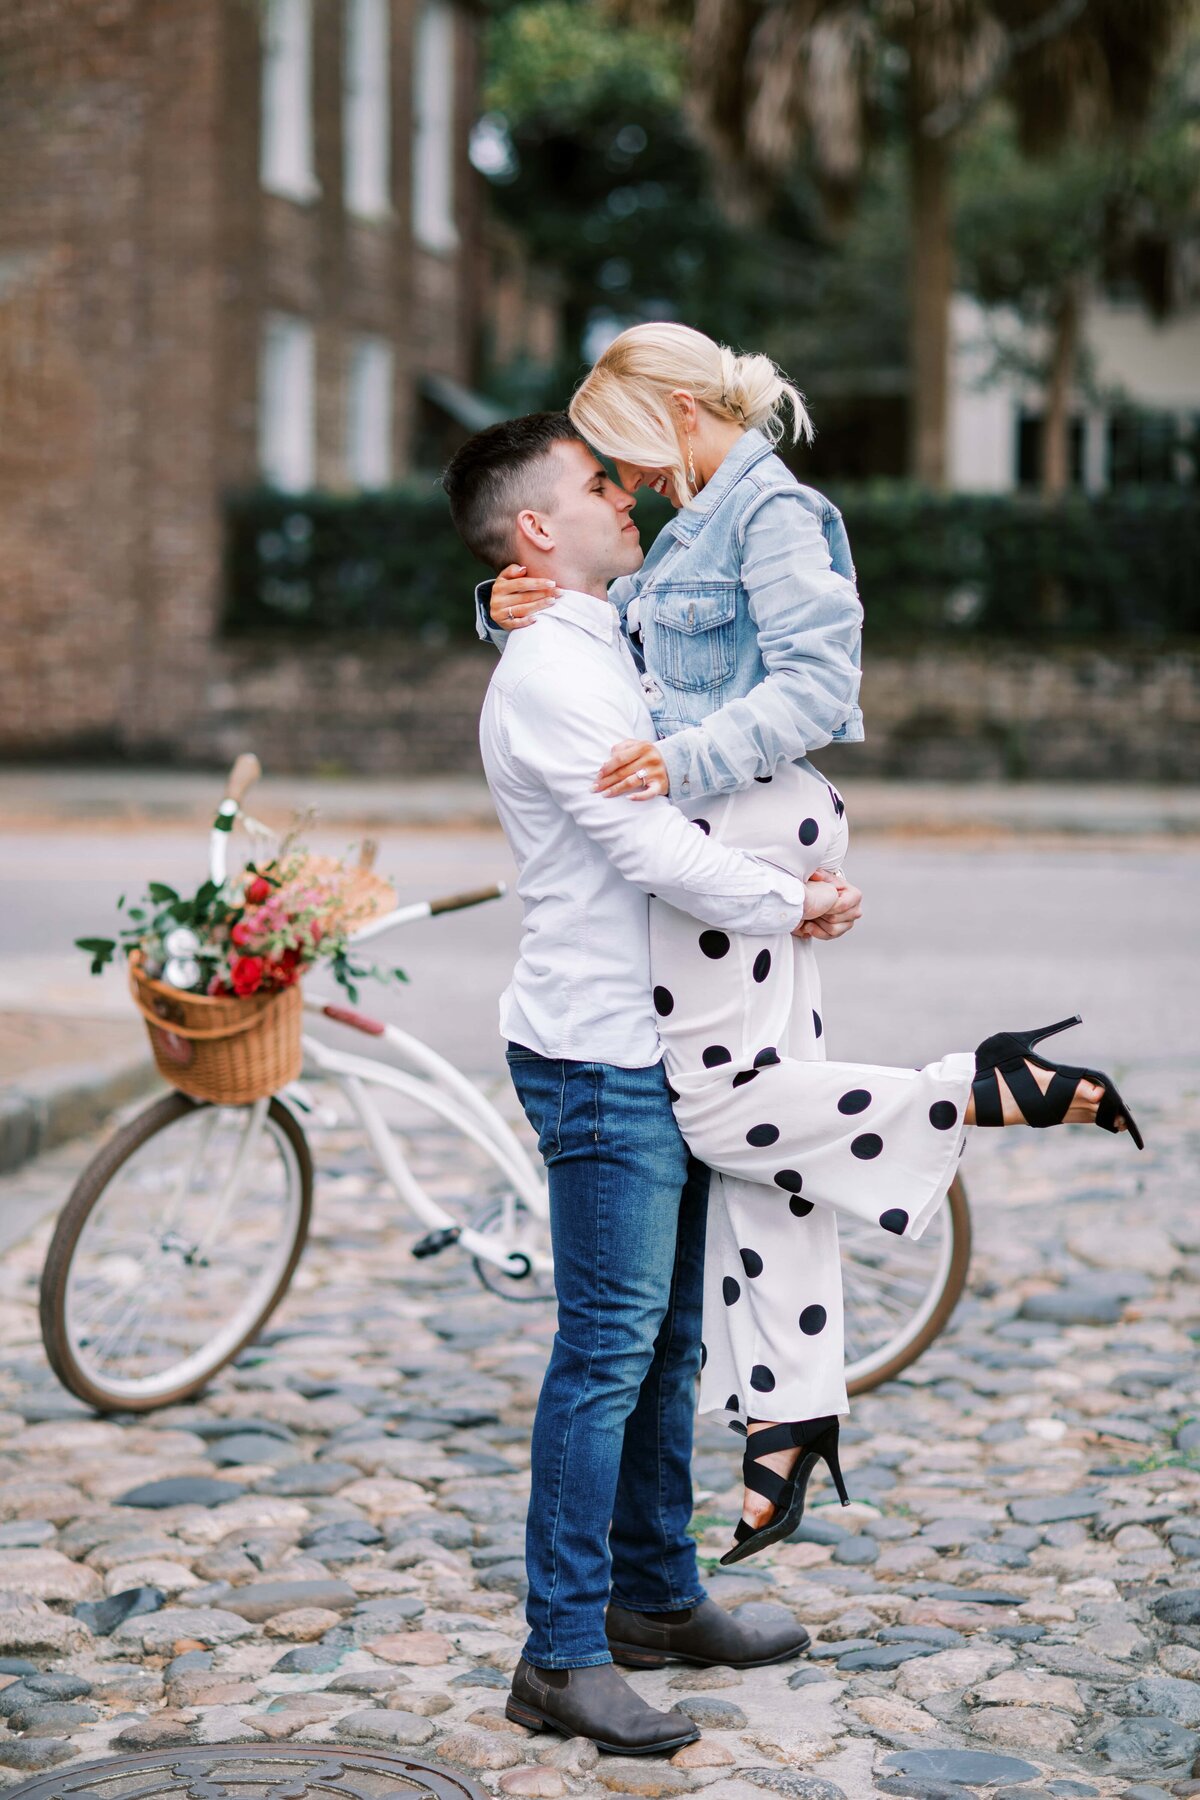 Iconic Charleston engagement photo by Danielle Defayette Photography of cute young couple on cobblestone street on Rainbow Row